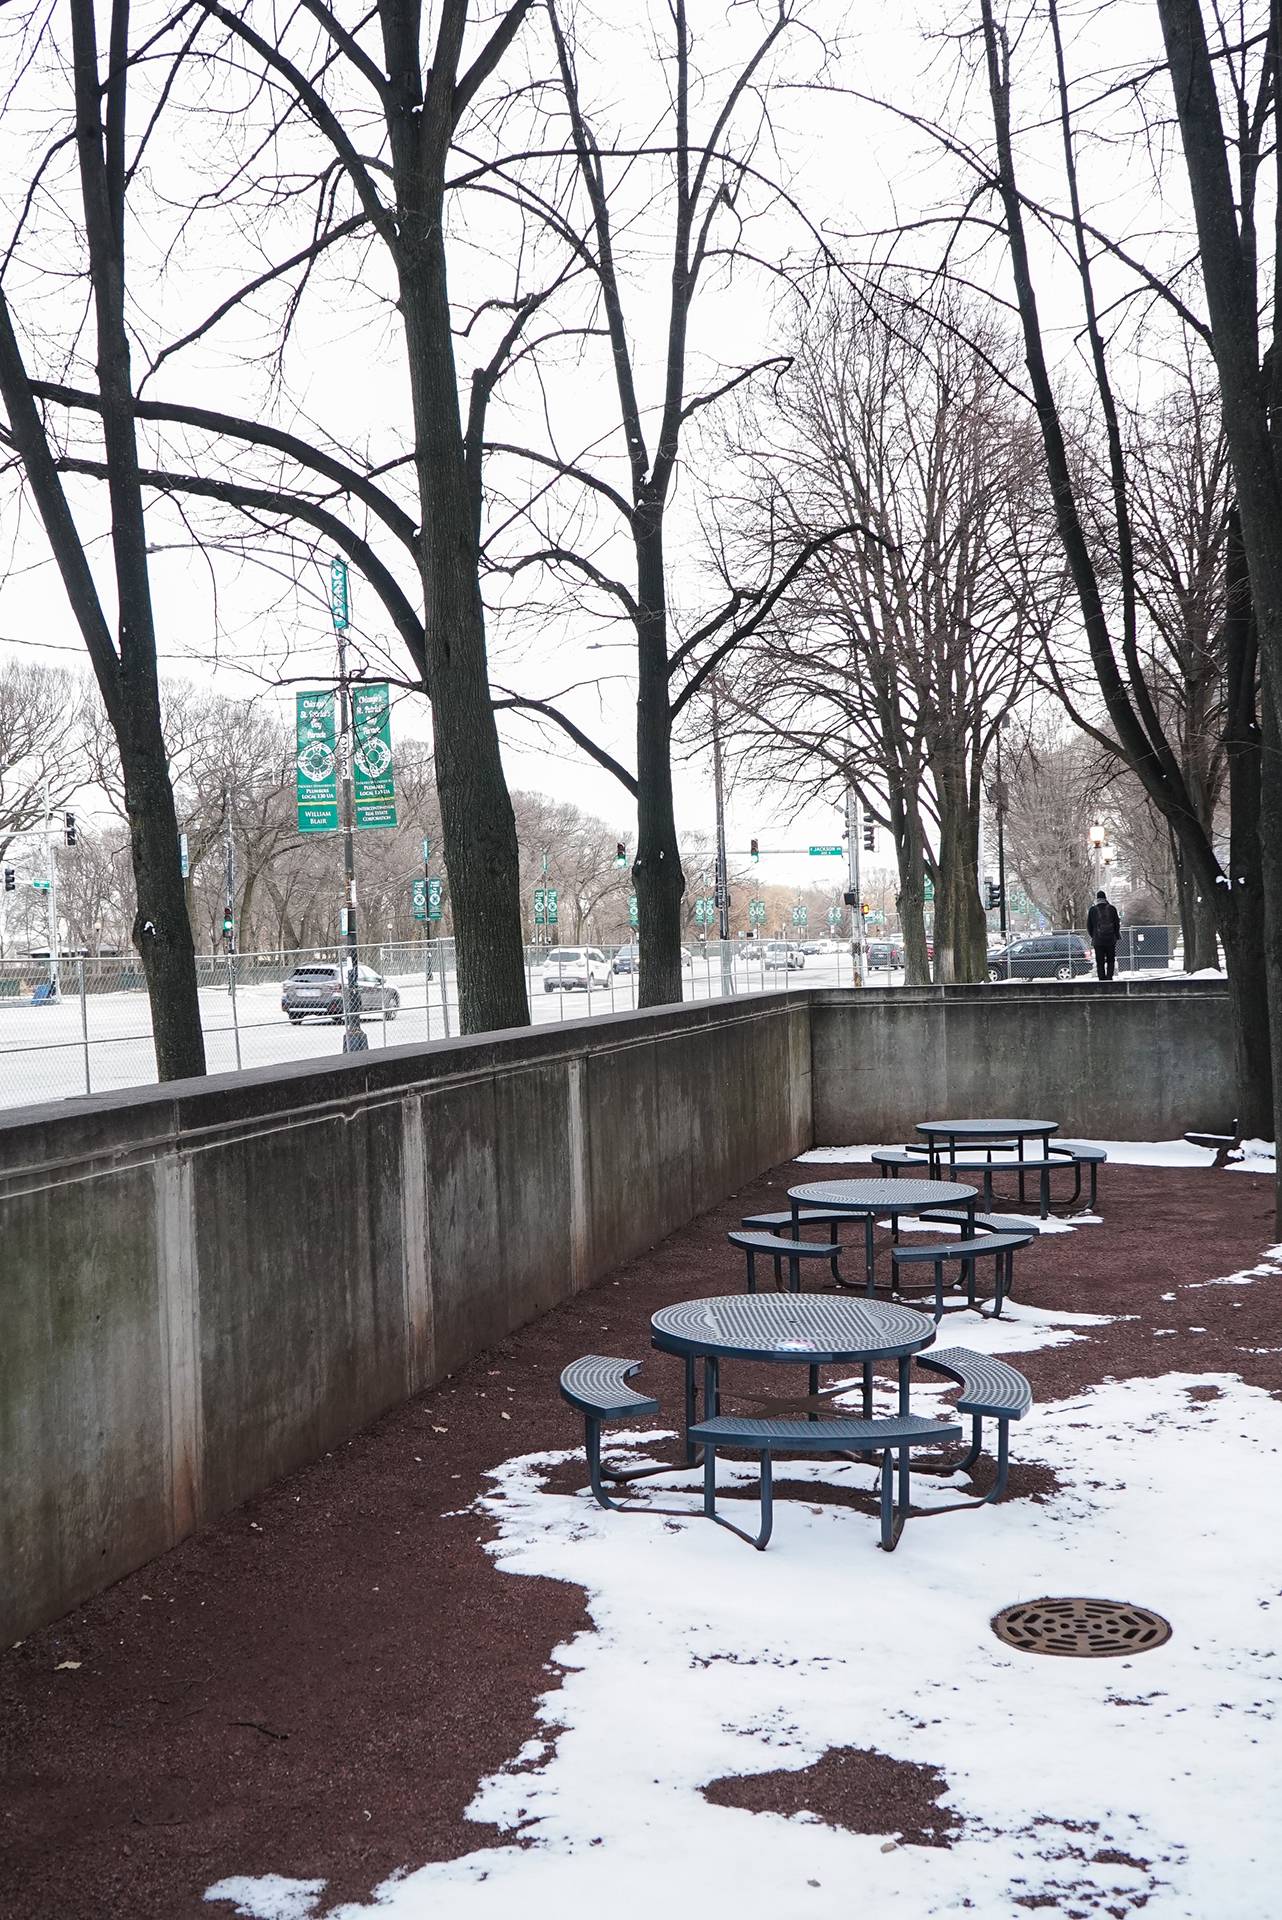 Snowy benches outside the 280 building.